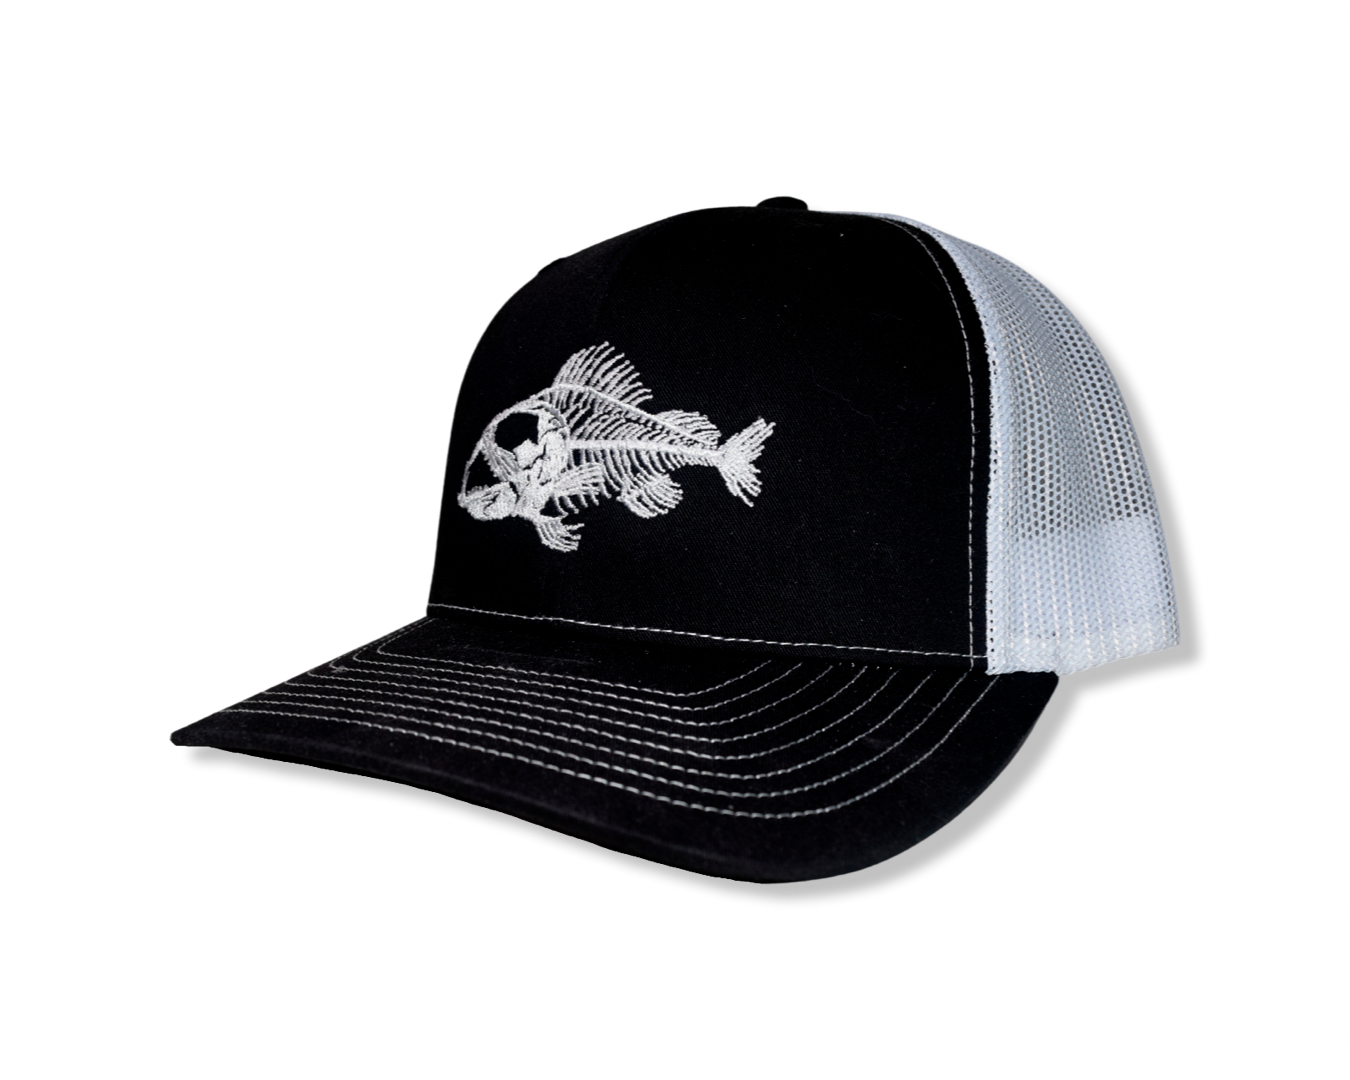 Would you rock this old trucker hat?? #throwback #hats #fishing  #bassfishing